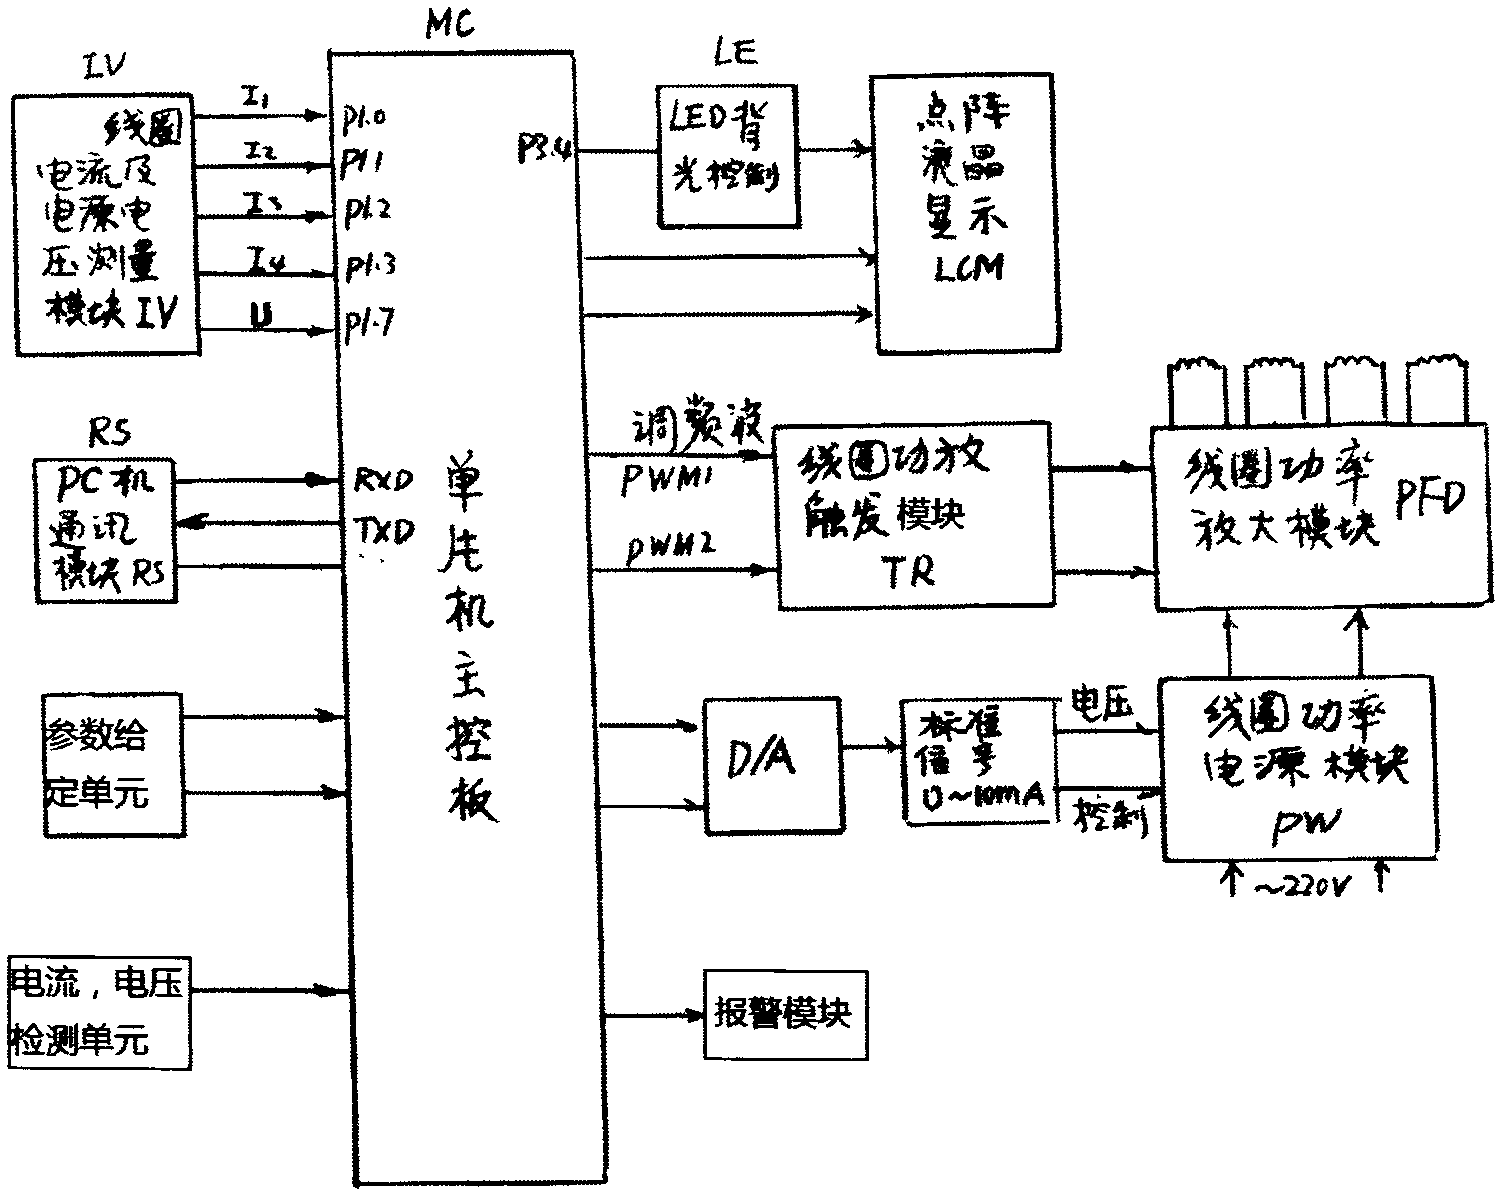 Adjustable-frequency electromagnetic descaling instrument